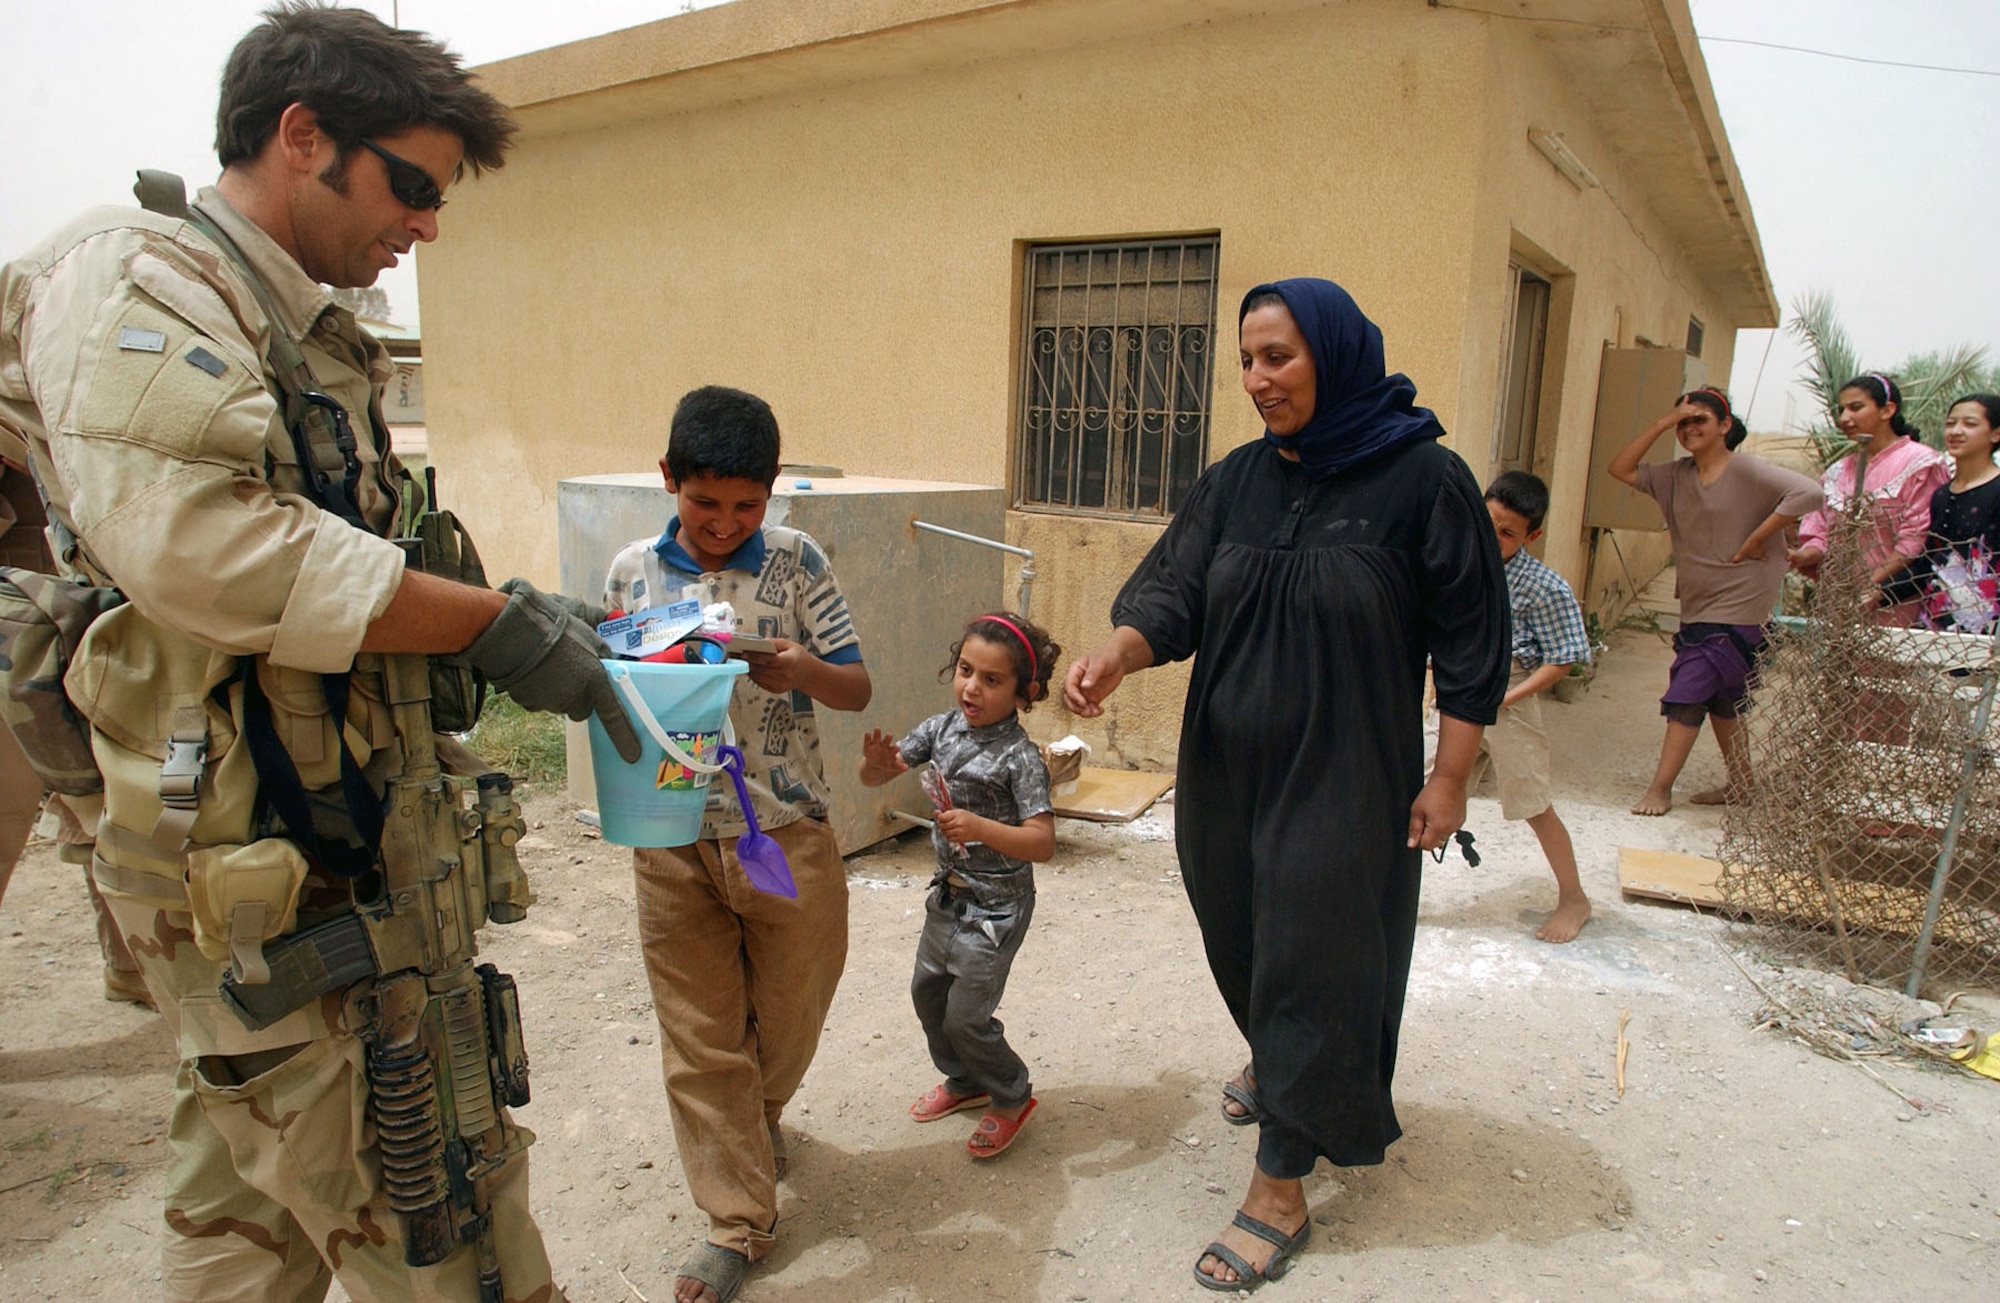 Combat Controller Staff Sgt. David Overton, passing out candy and toys to Iraqi children in Baghdad. (U.S. Air Force photo)